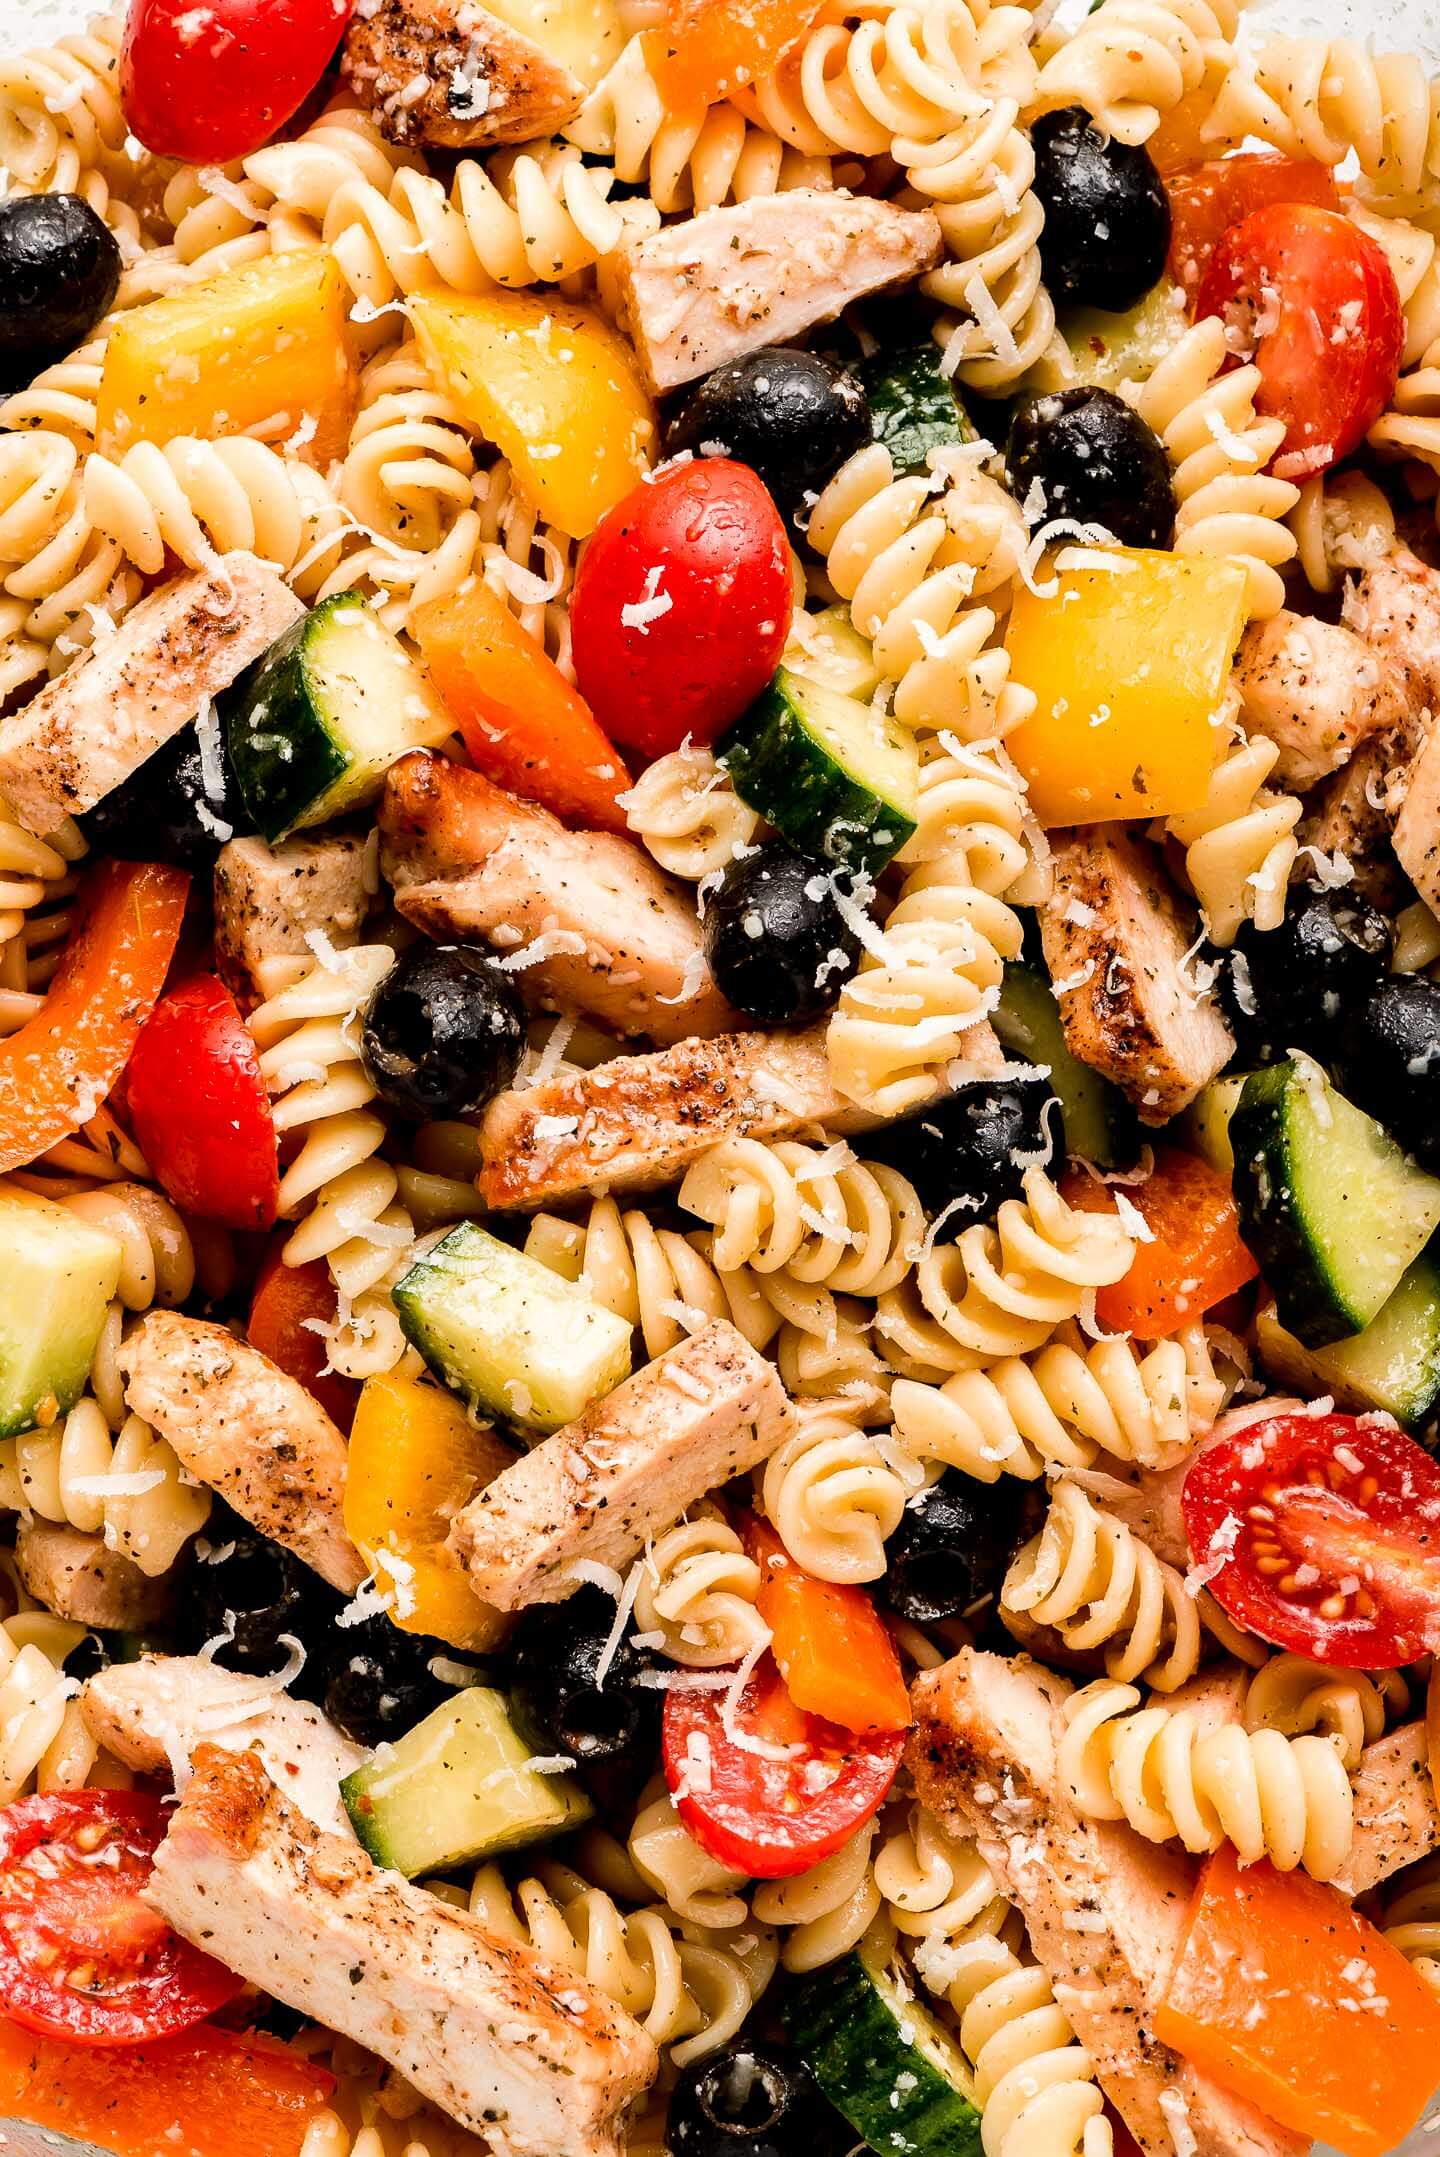 A close up shot of rotini pasta, sliced grilled chicken, black olives, grape tomatoes, cucumbers, and peppers.